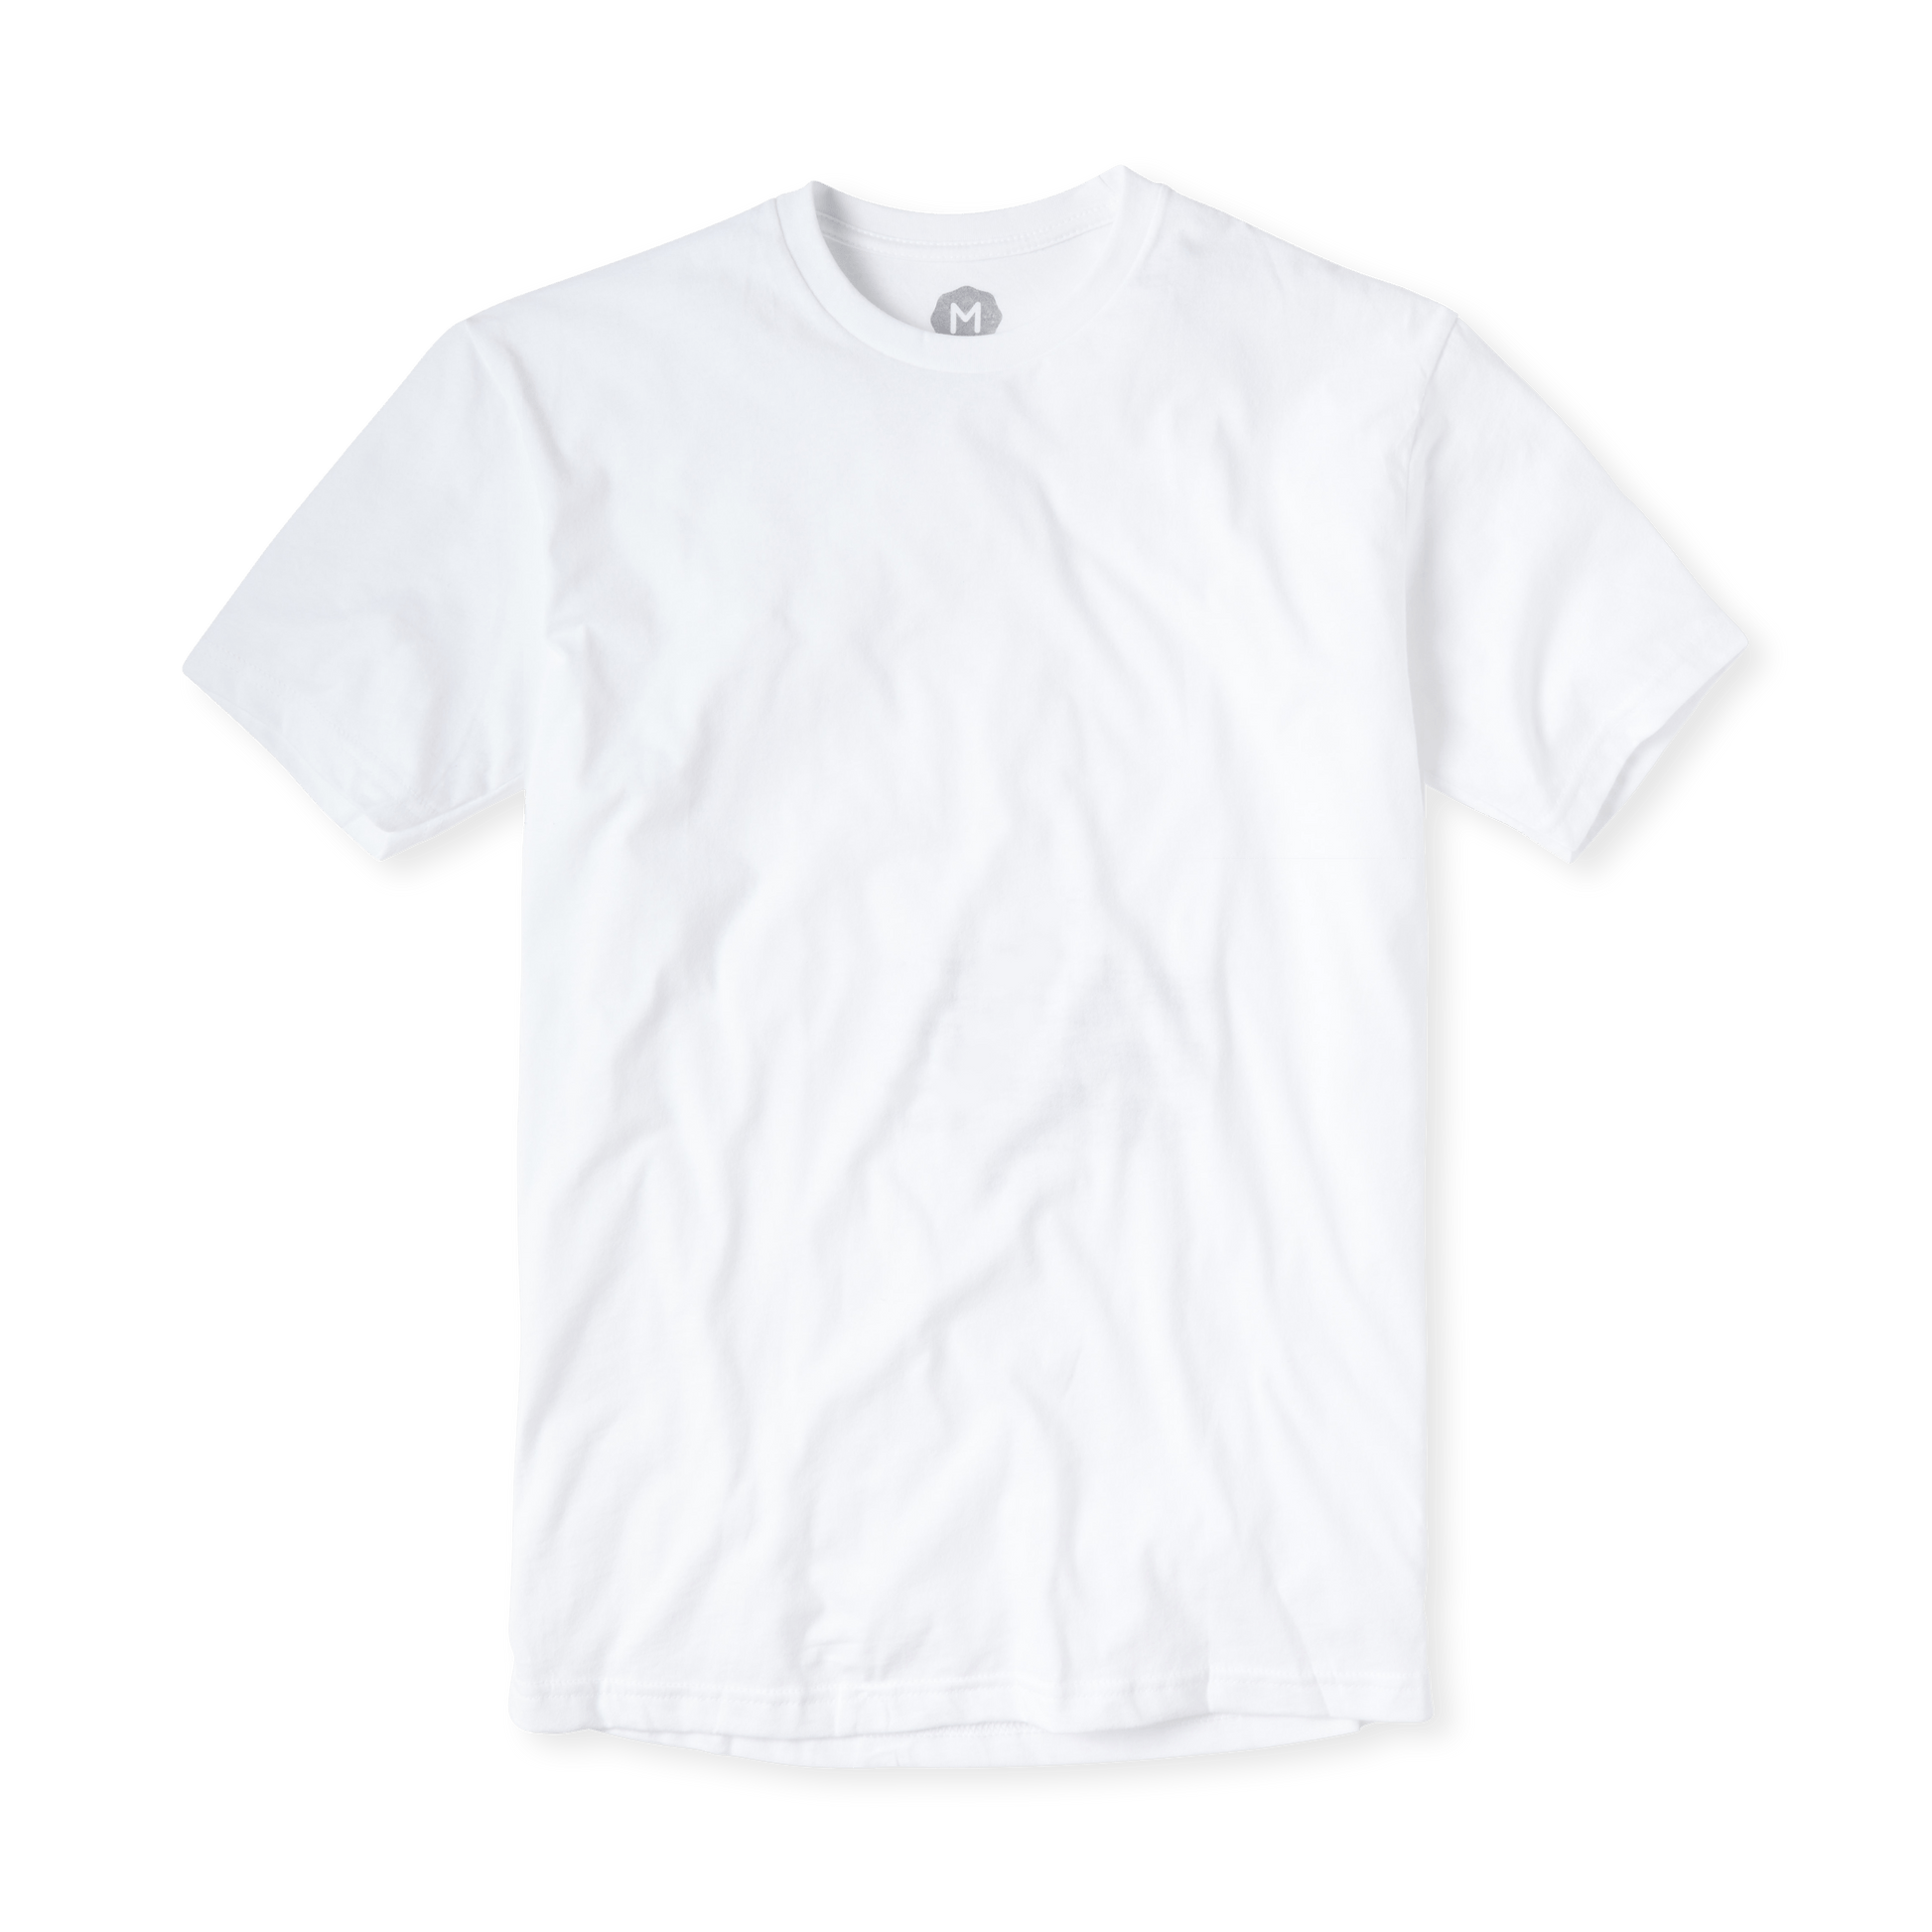 Introduction to Blank T-Shirts